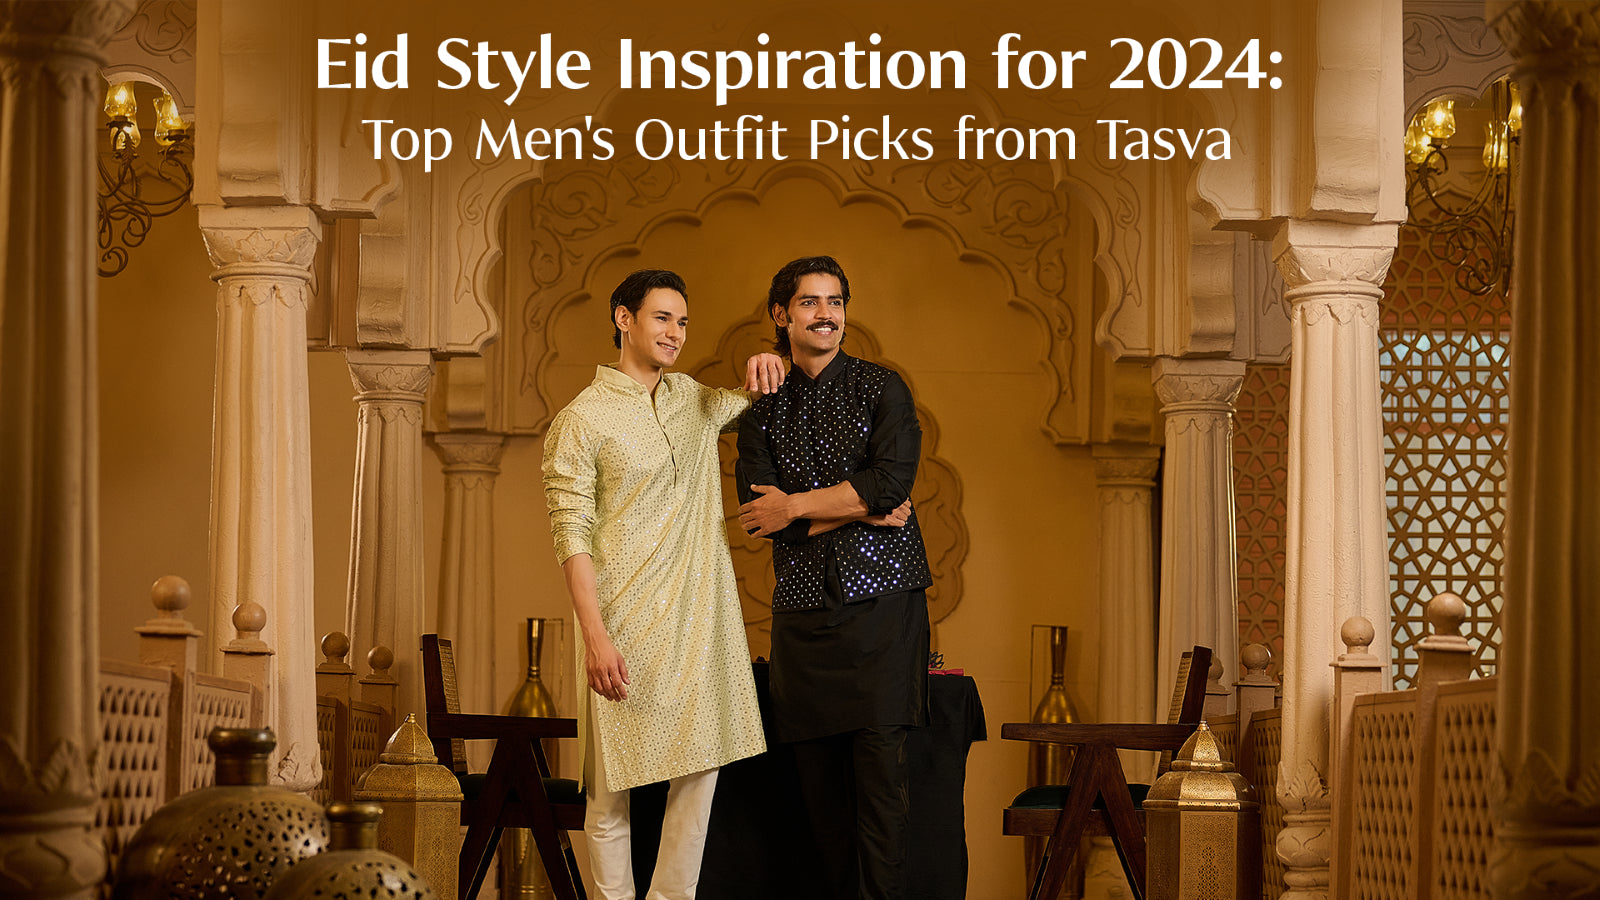 Eid Style Inspiration for 2024: Top Men's Outfit Picks from Tasva